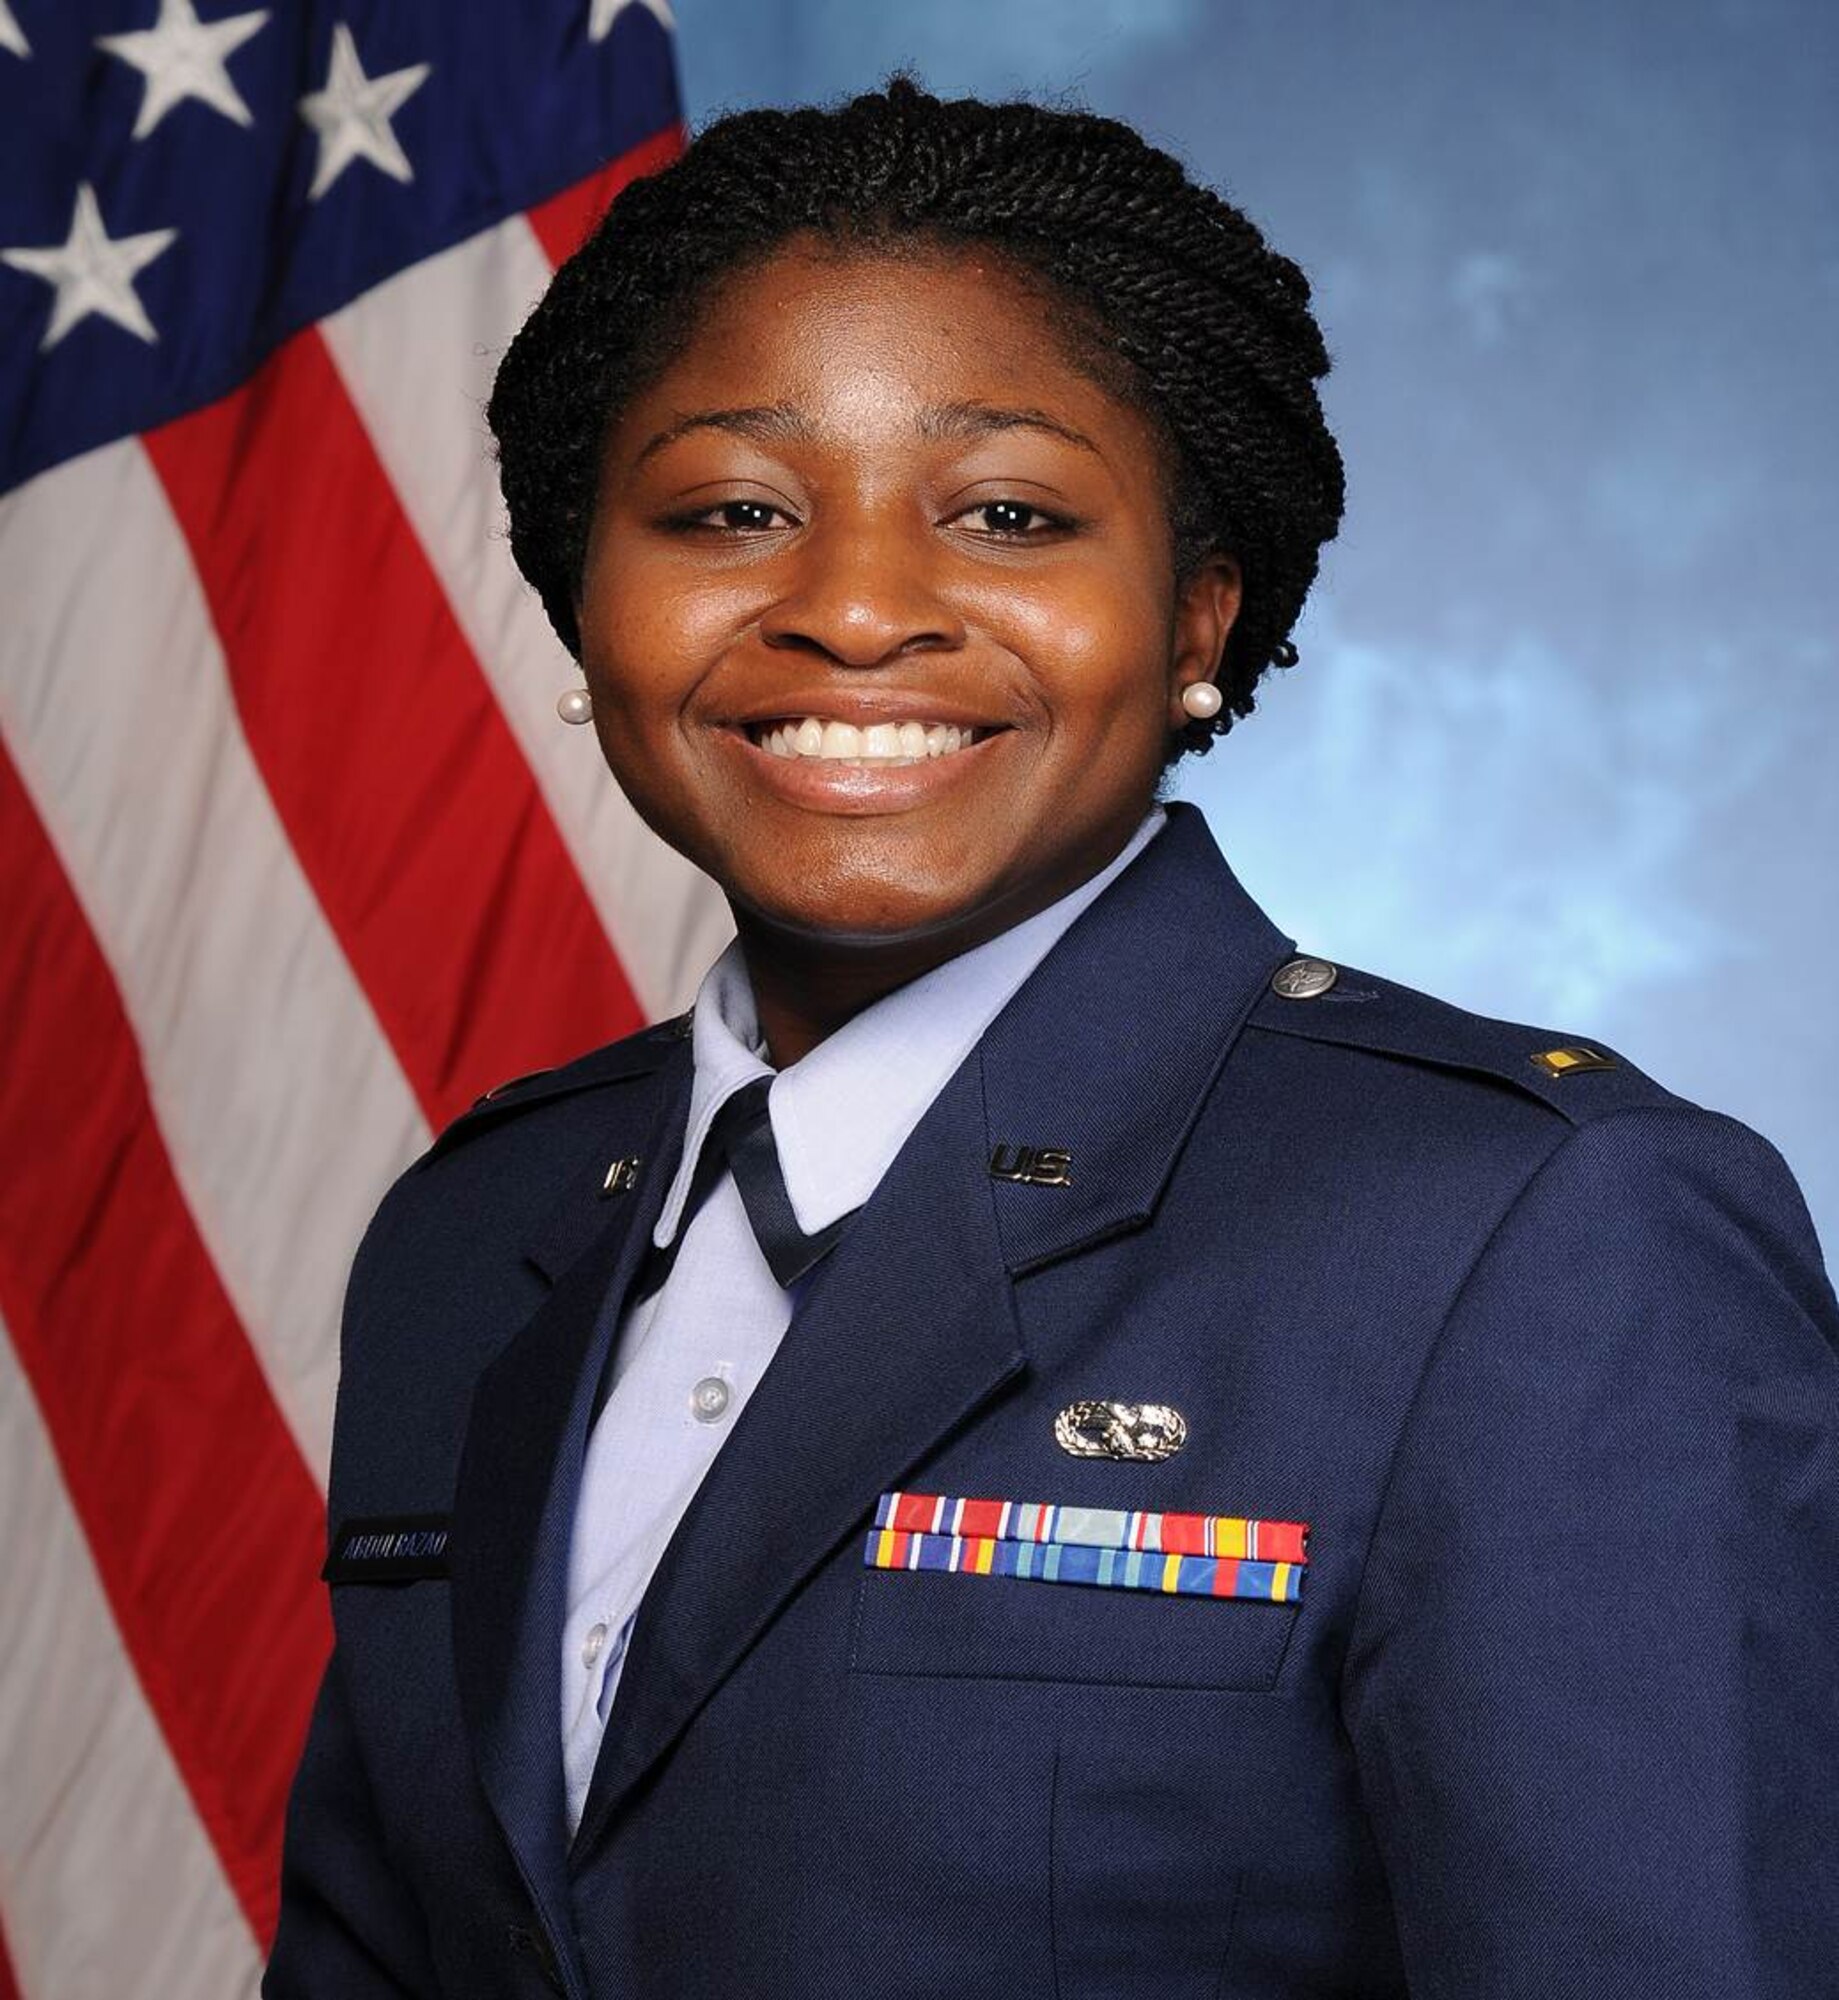 Second Lt. Lelia Abdulrazaq, from Nigeria, started her Air Force career as an enlisted Airman but took advantage of the Leaders Encouraging Airman Developing program to attend the U.S. Air Force Academy Prep School, become a cadet and eventually serve in the Academy admissions office where she advises possible future officers. (Courtesy photo)